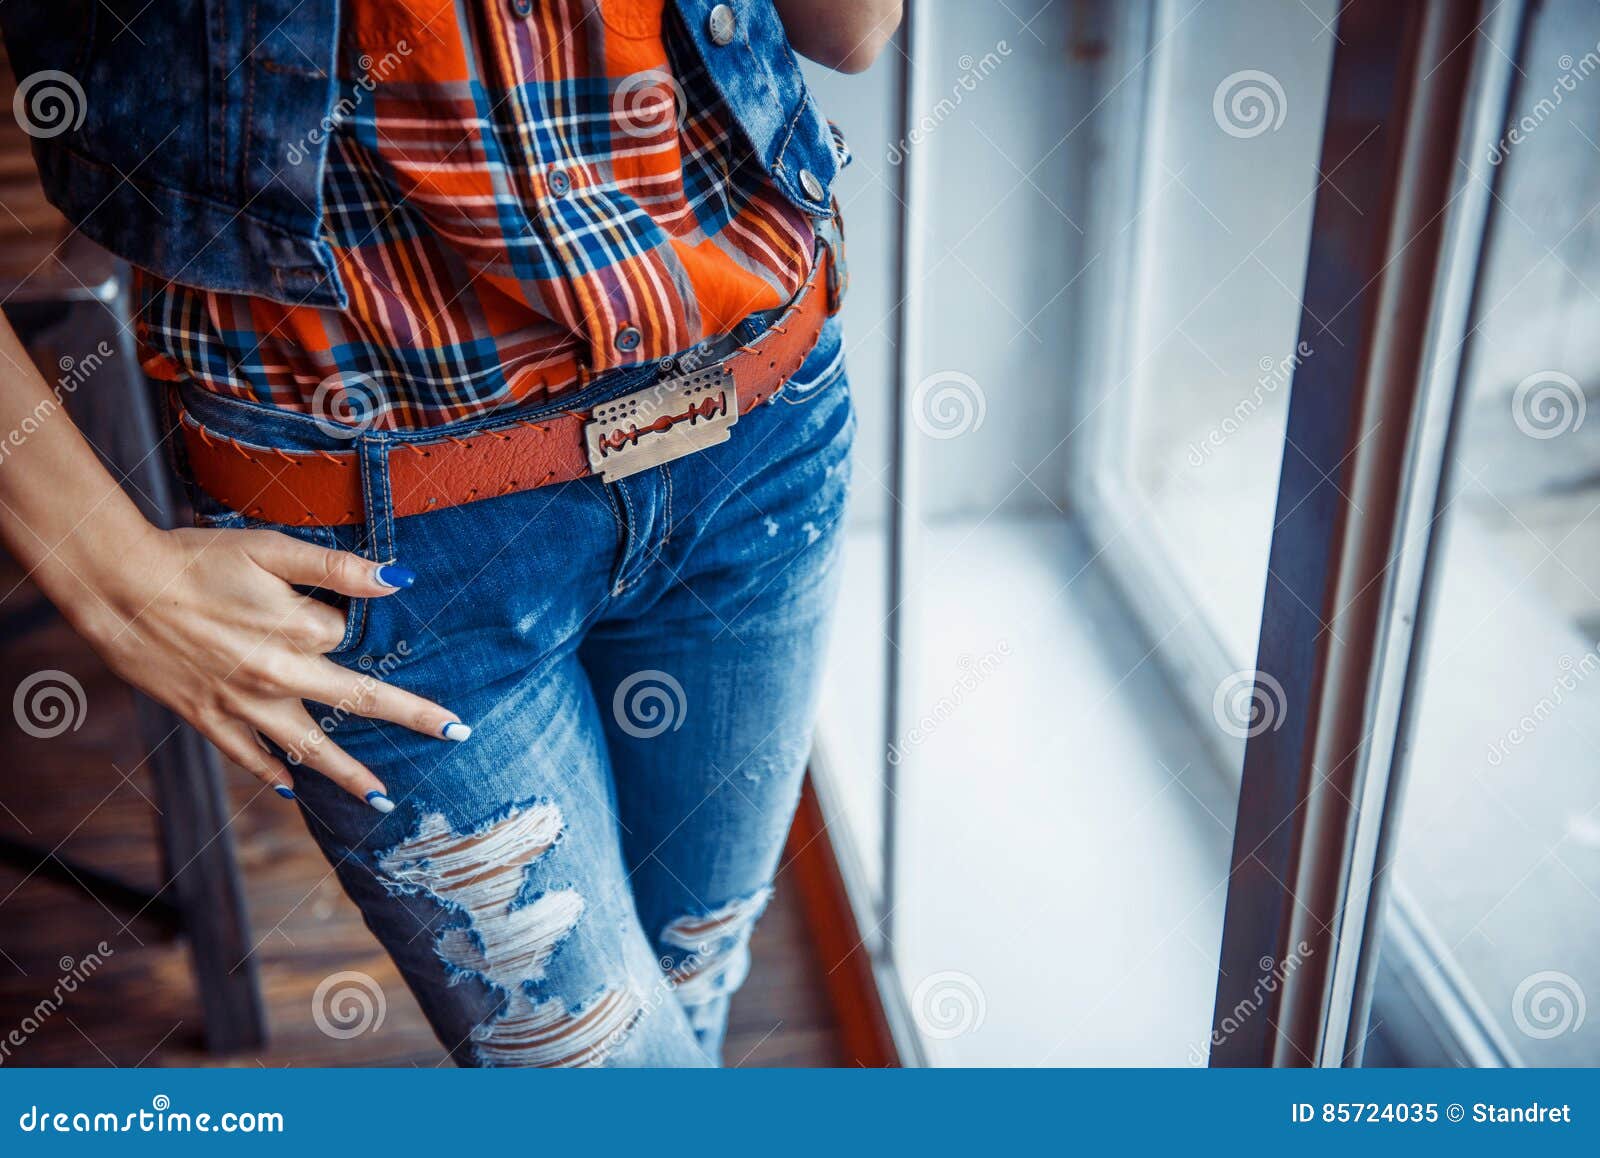 Girl in Jeans.Art Processing and Retouching Photos Special. Stock Image ...